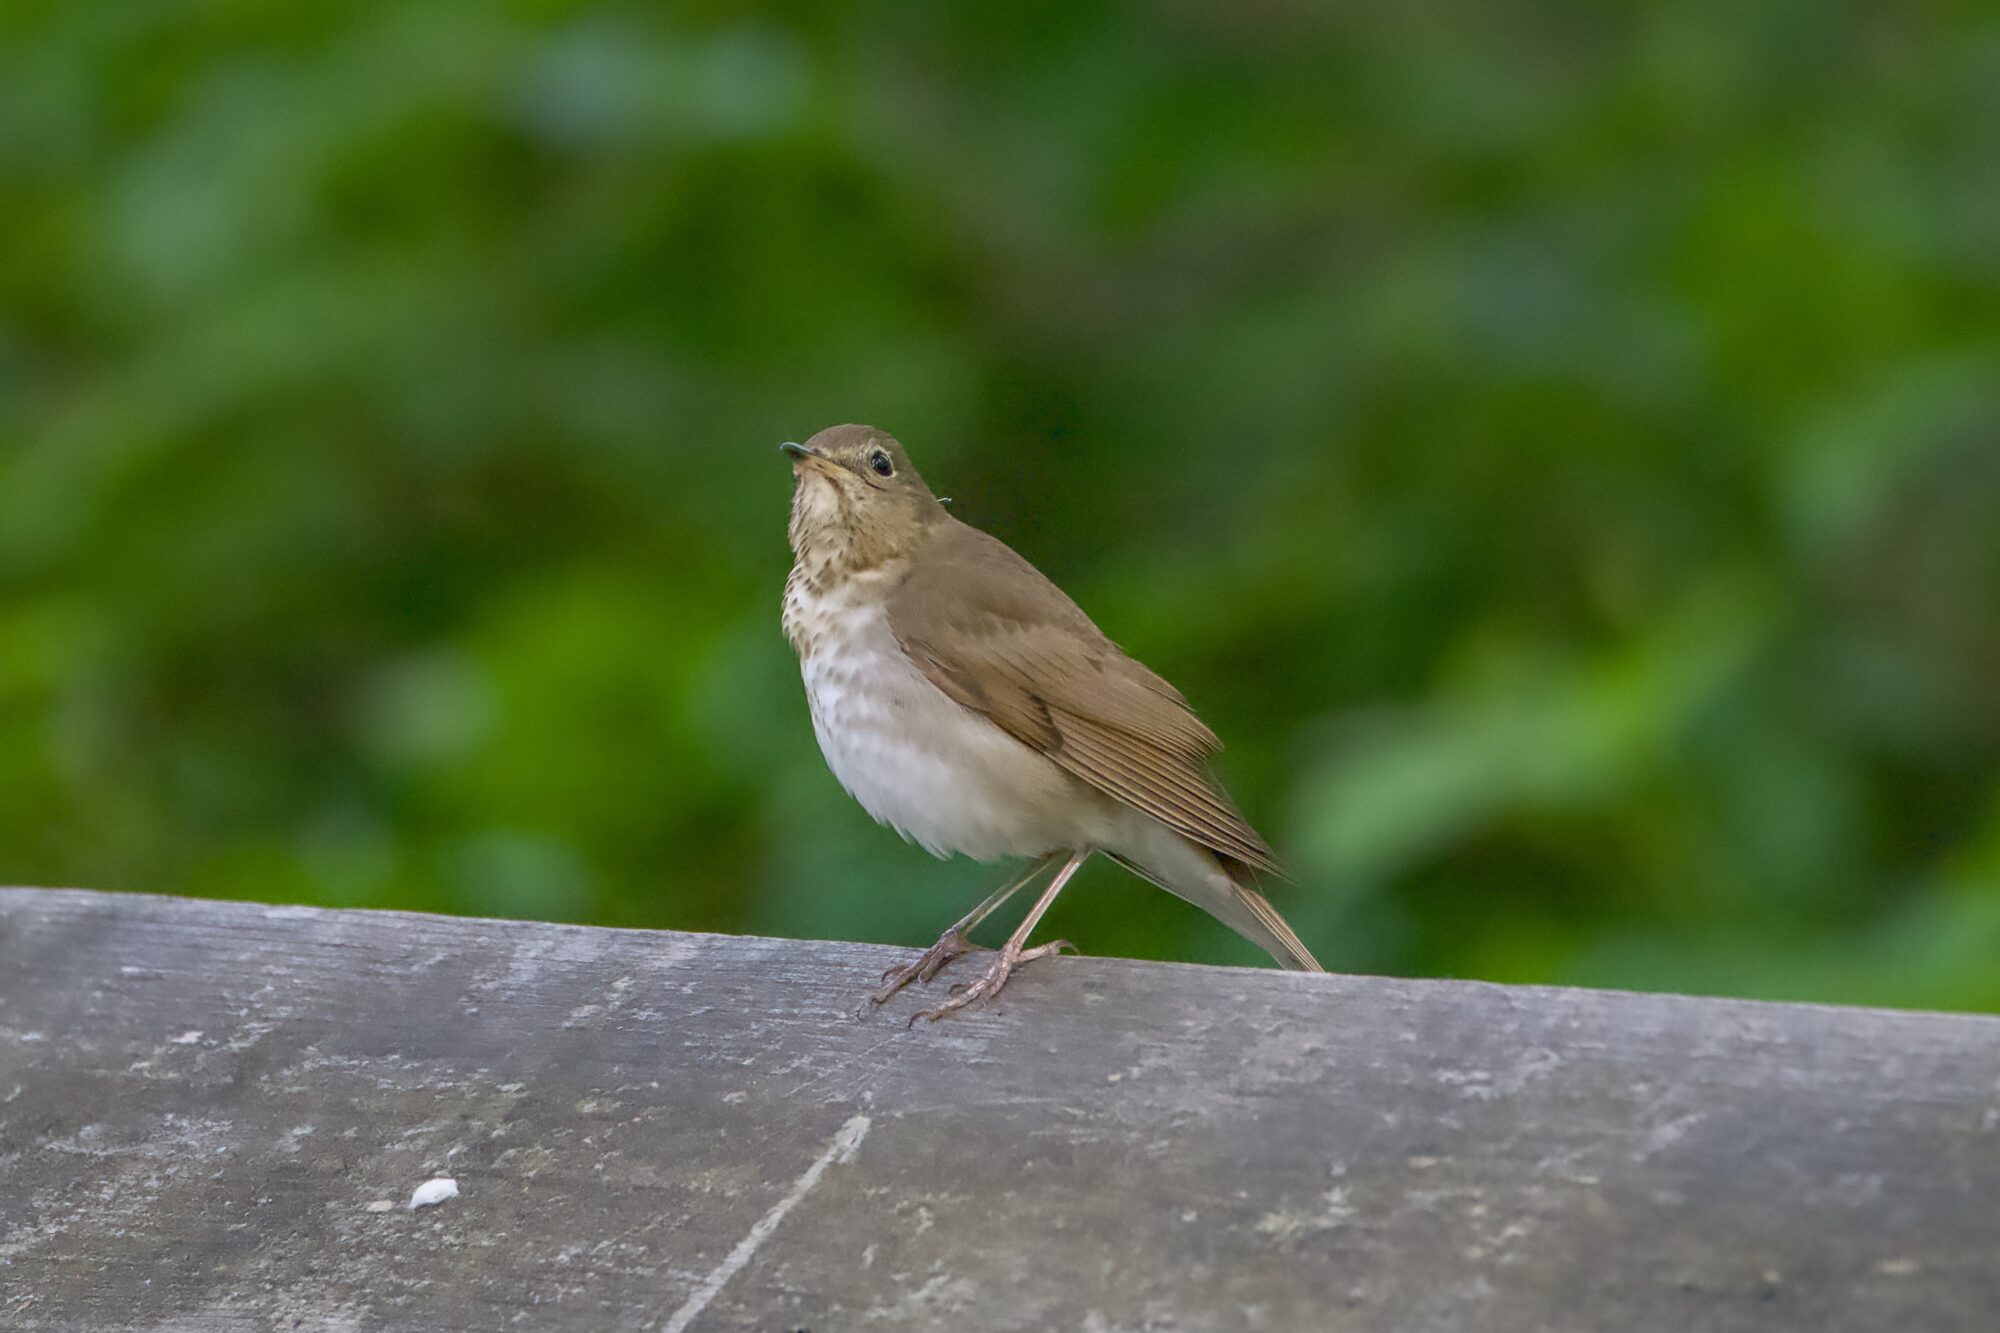 A Swainson's Thrush on a wooden fence, against a dark green background